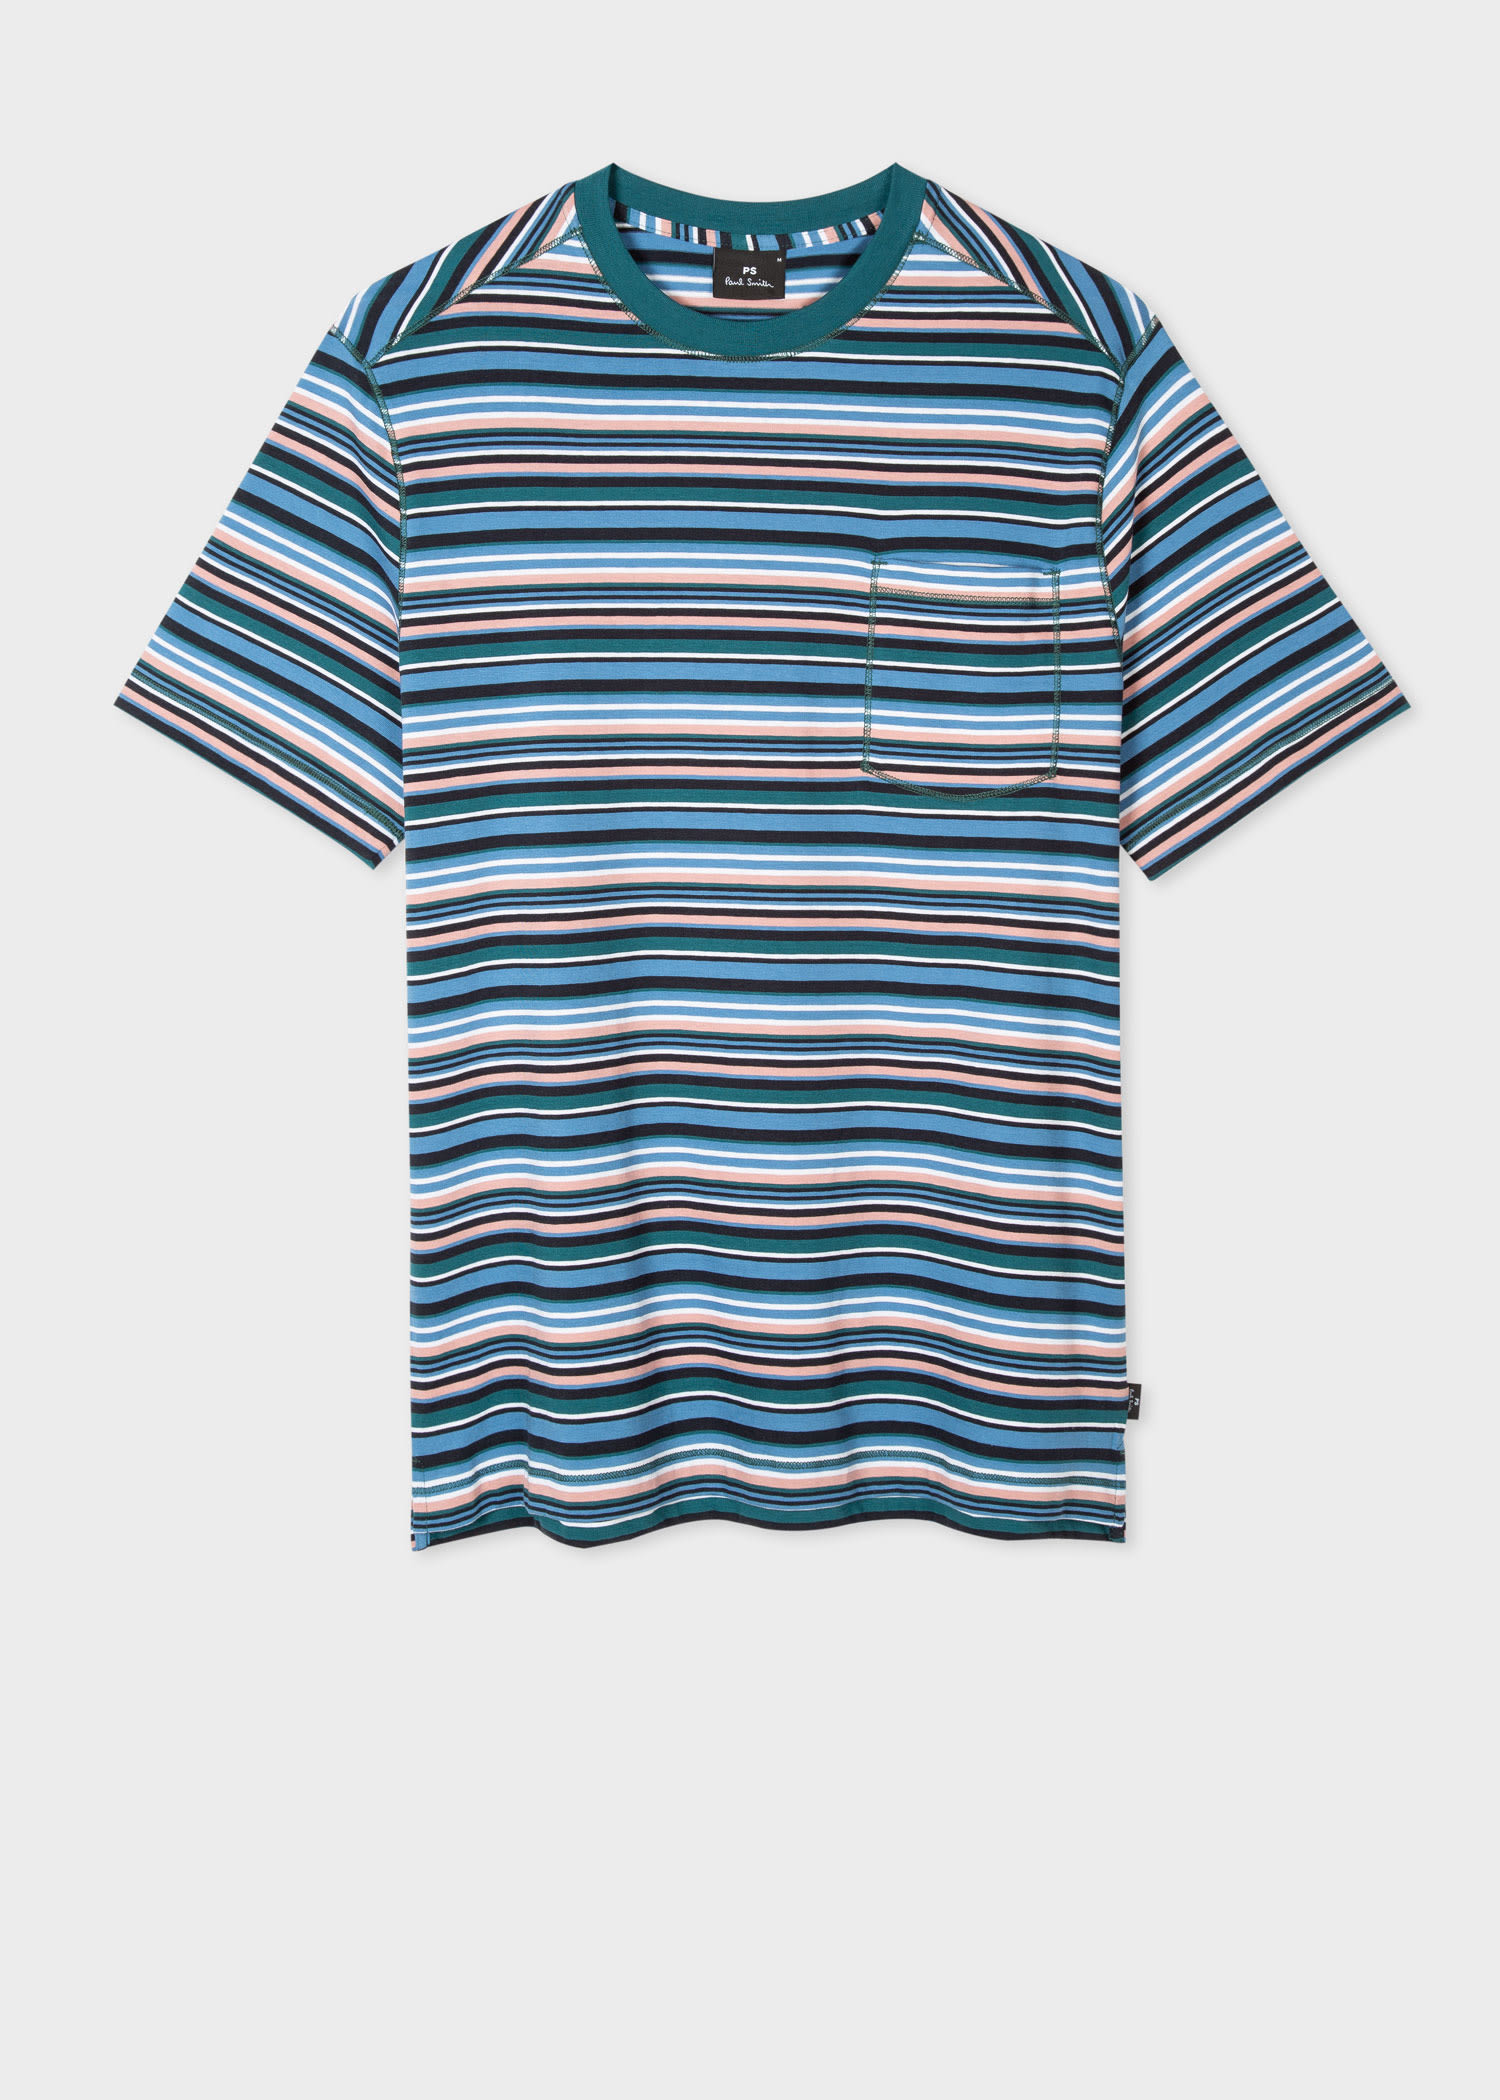 PS Paul Smith Collection For Men - Paul Smith Europe